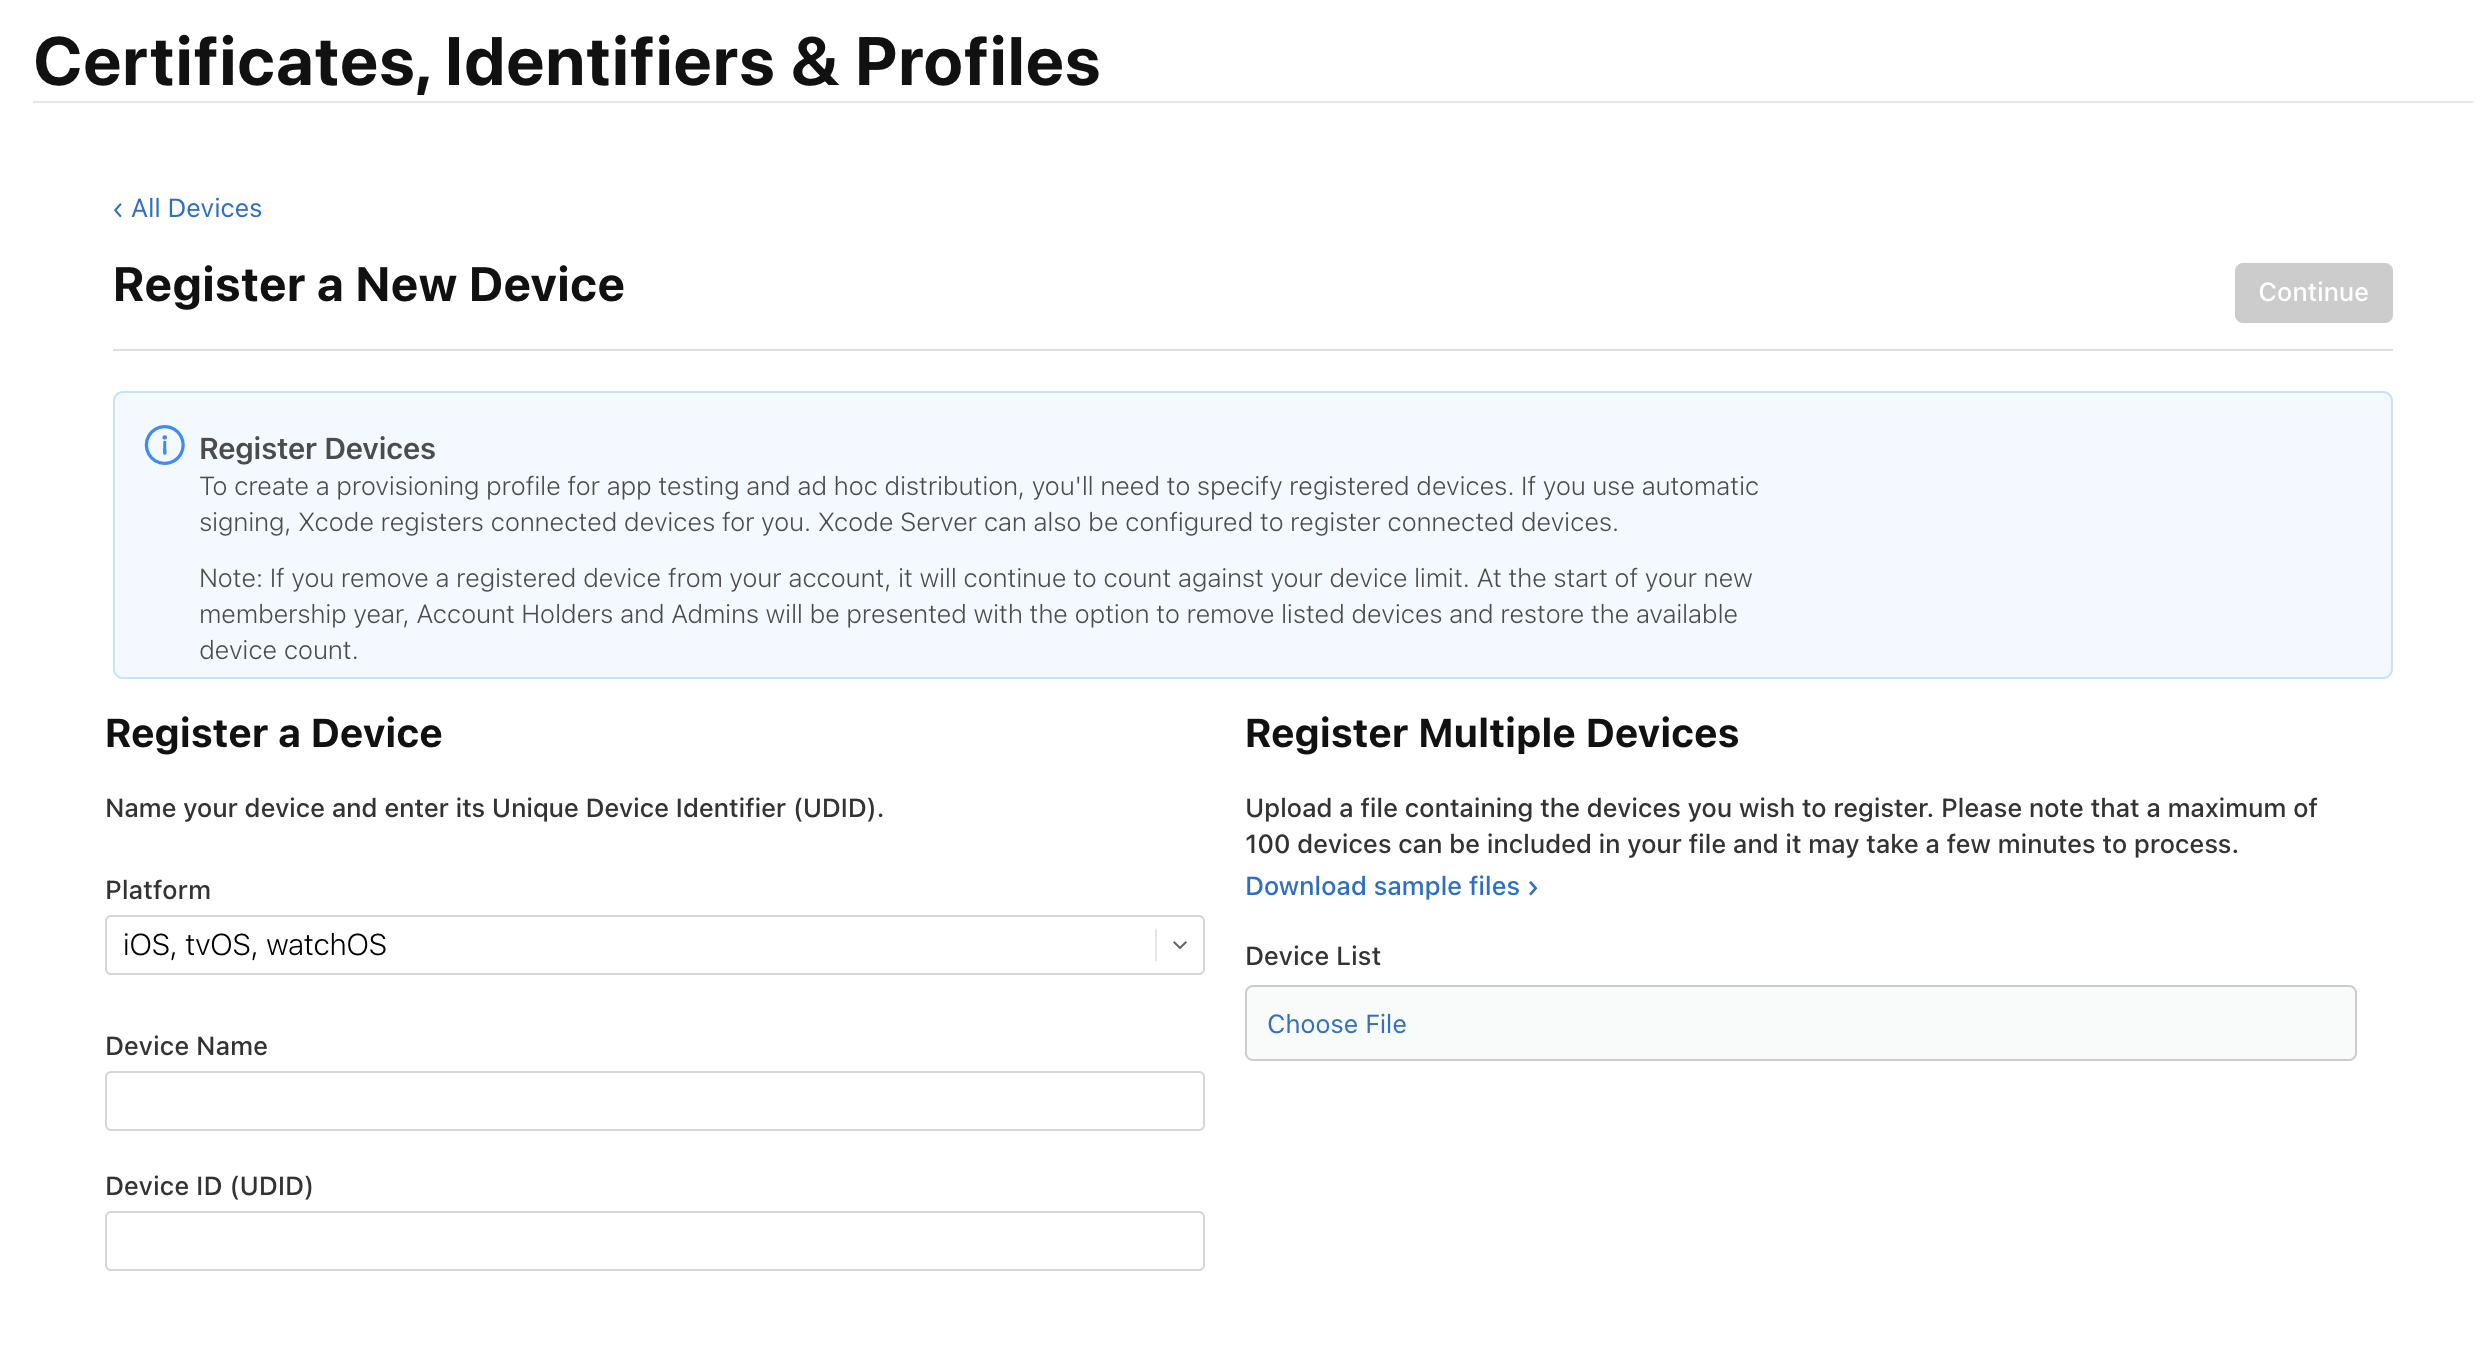 Register a device.